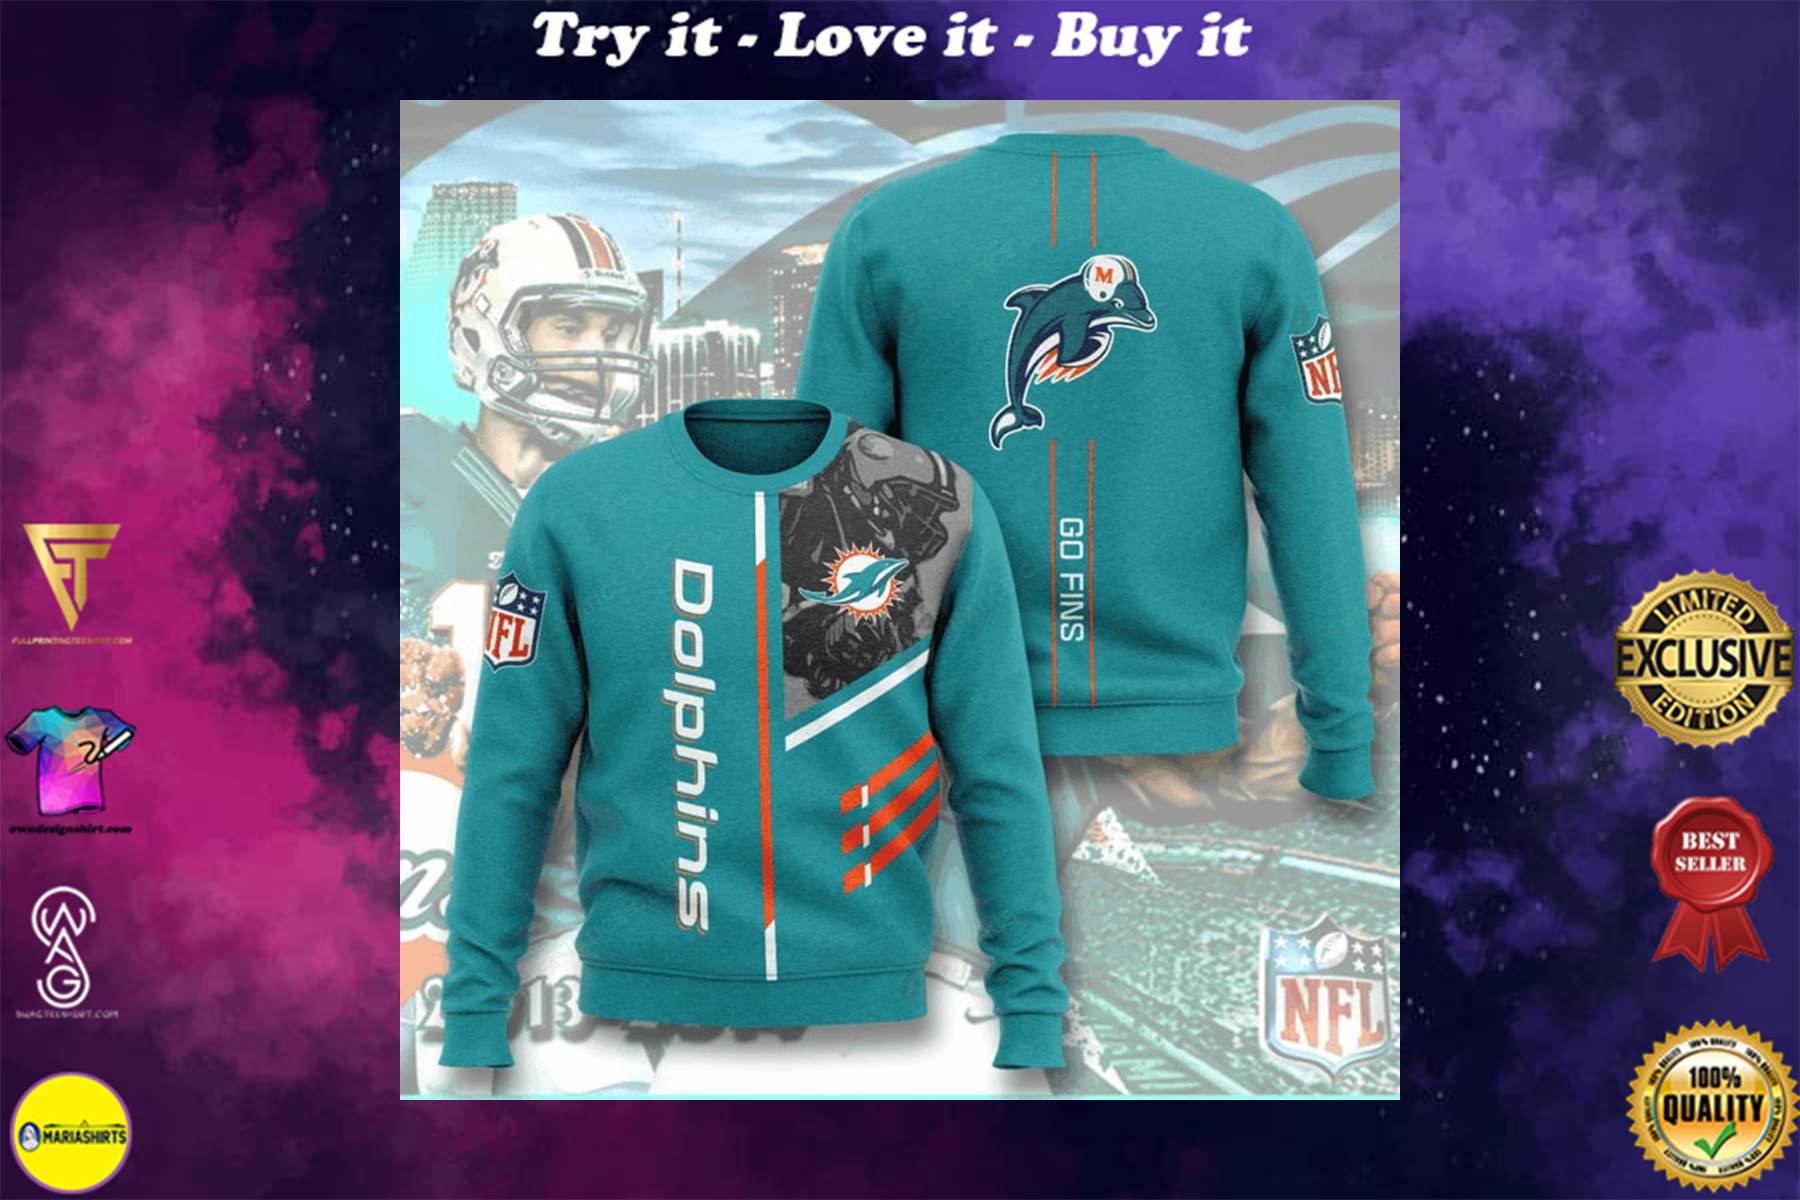 [special edition] national football league miami dolphins go fins full printing ugly sweater – maria